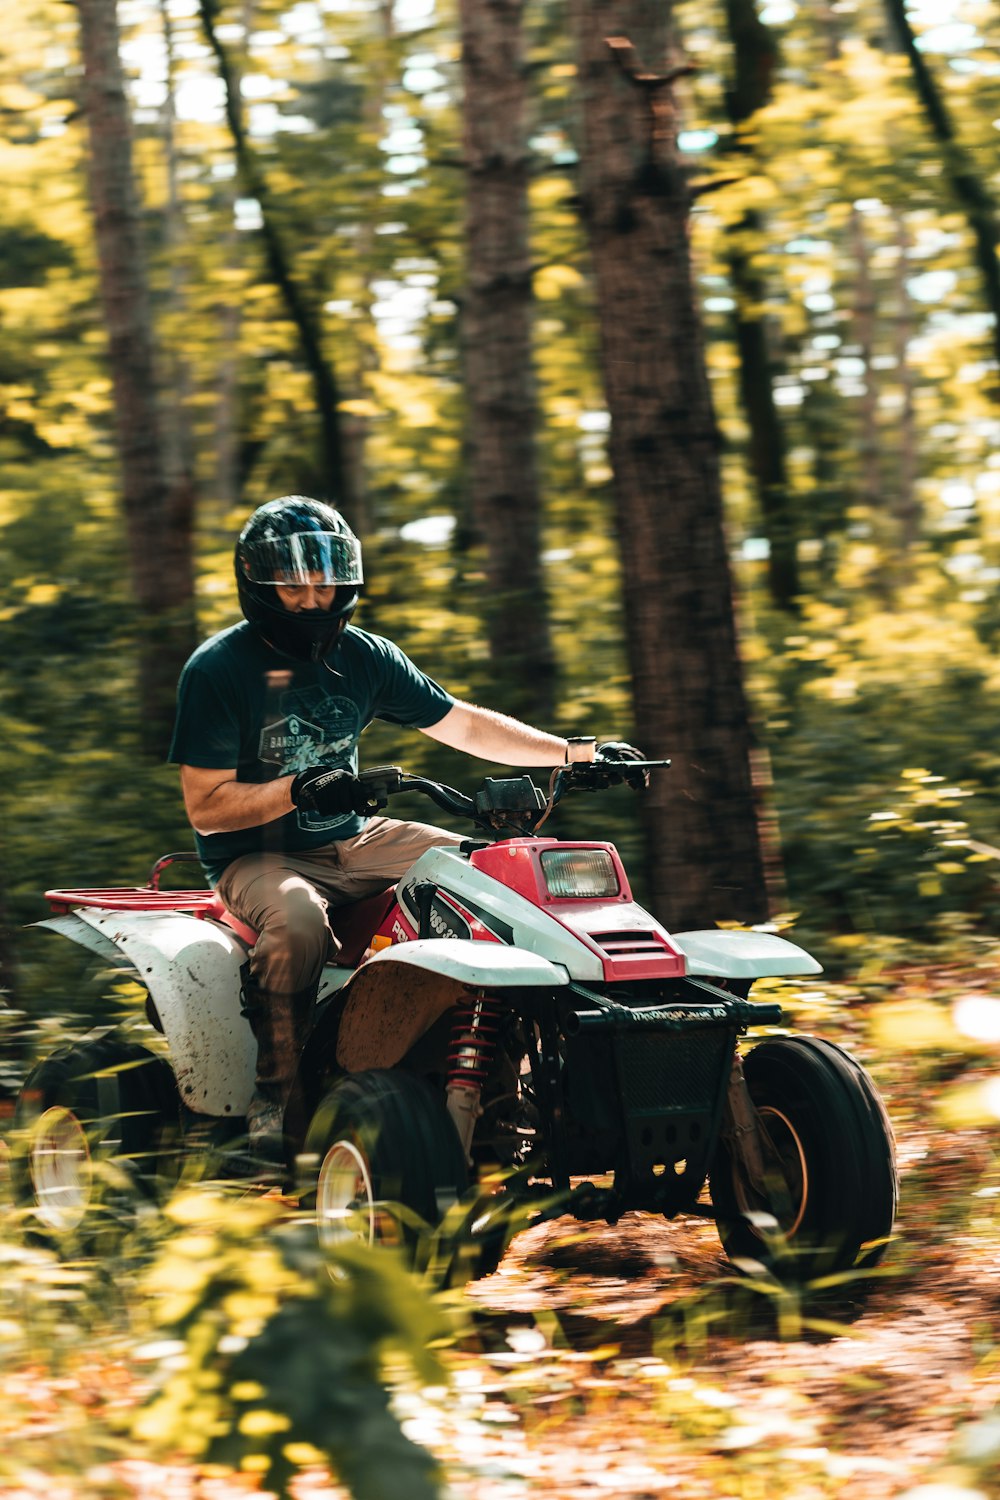 man riding atv in forest during daytime